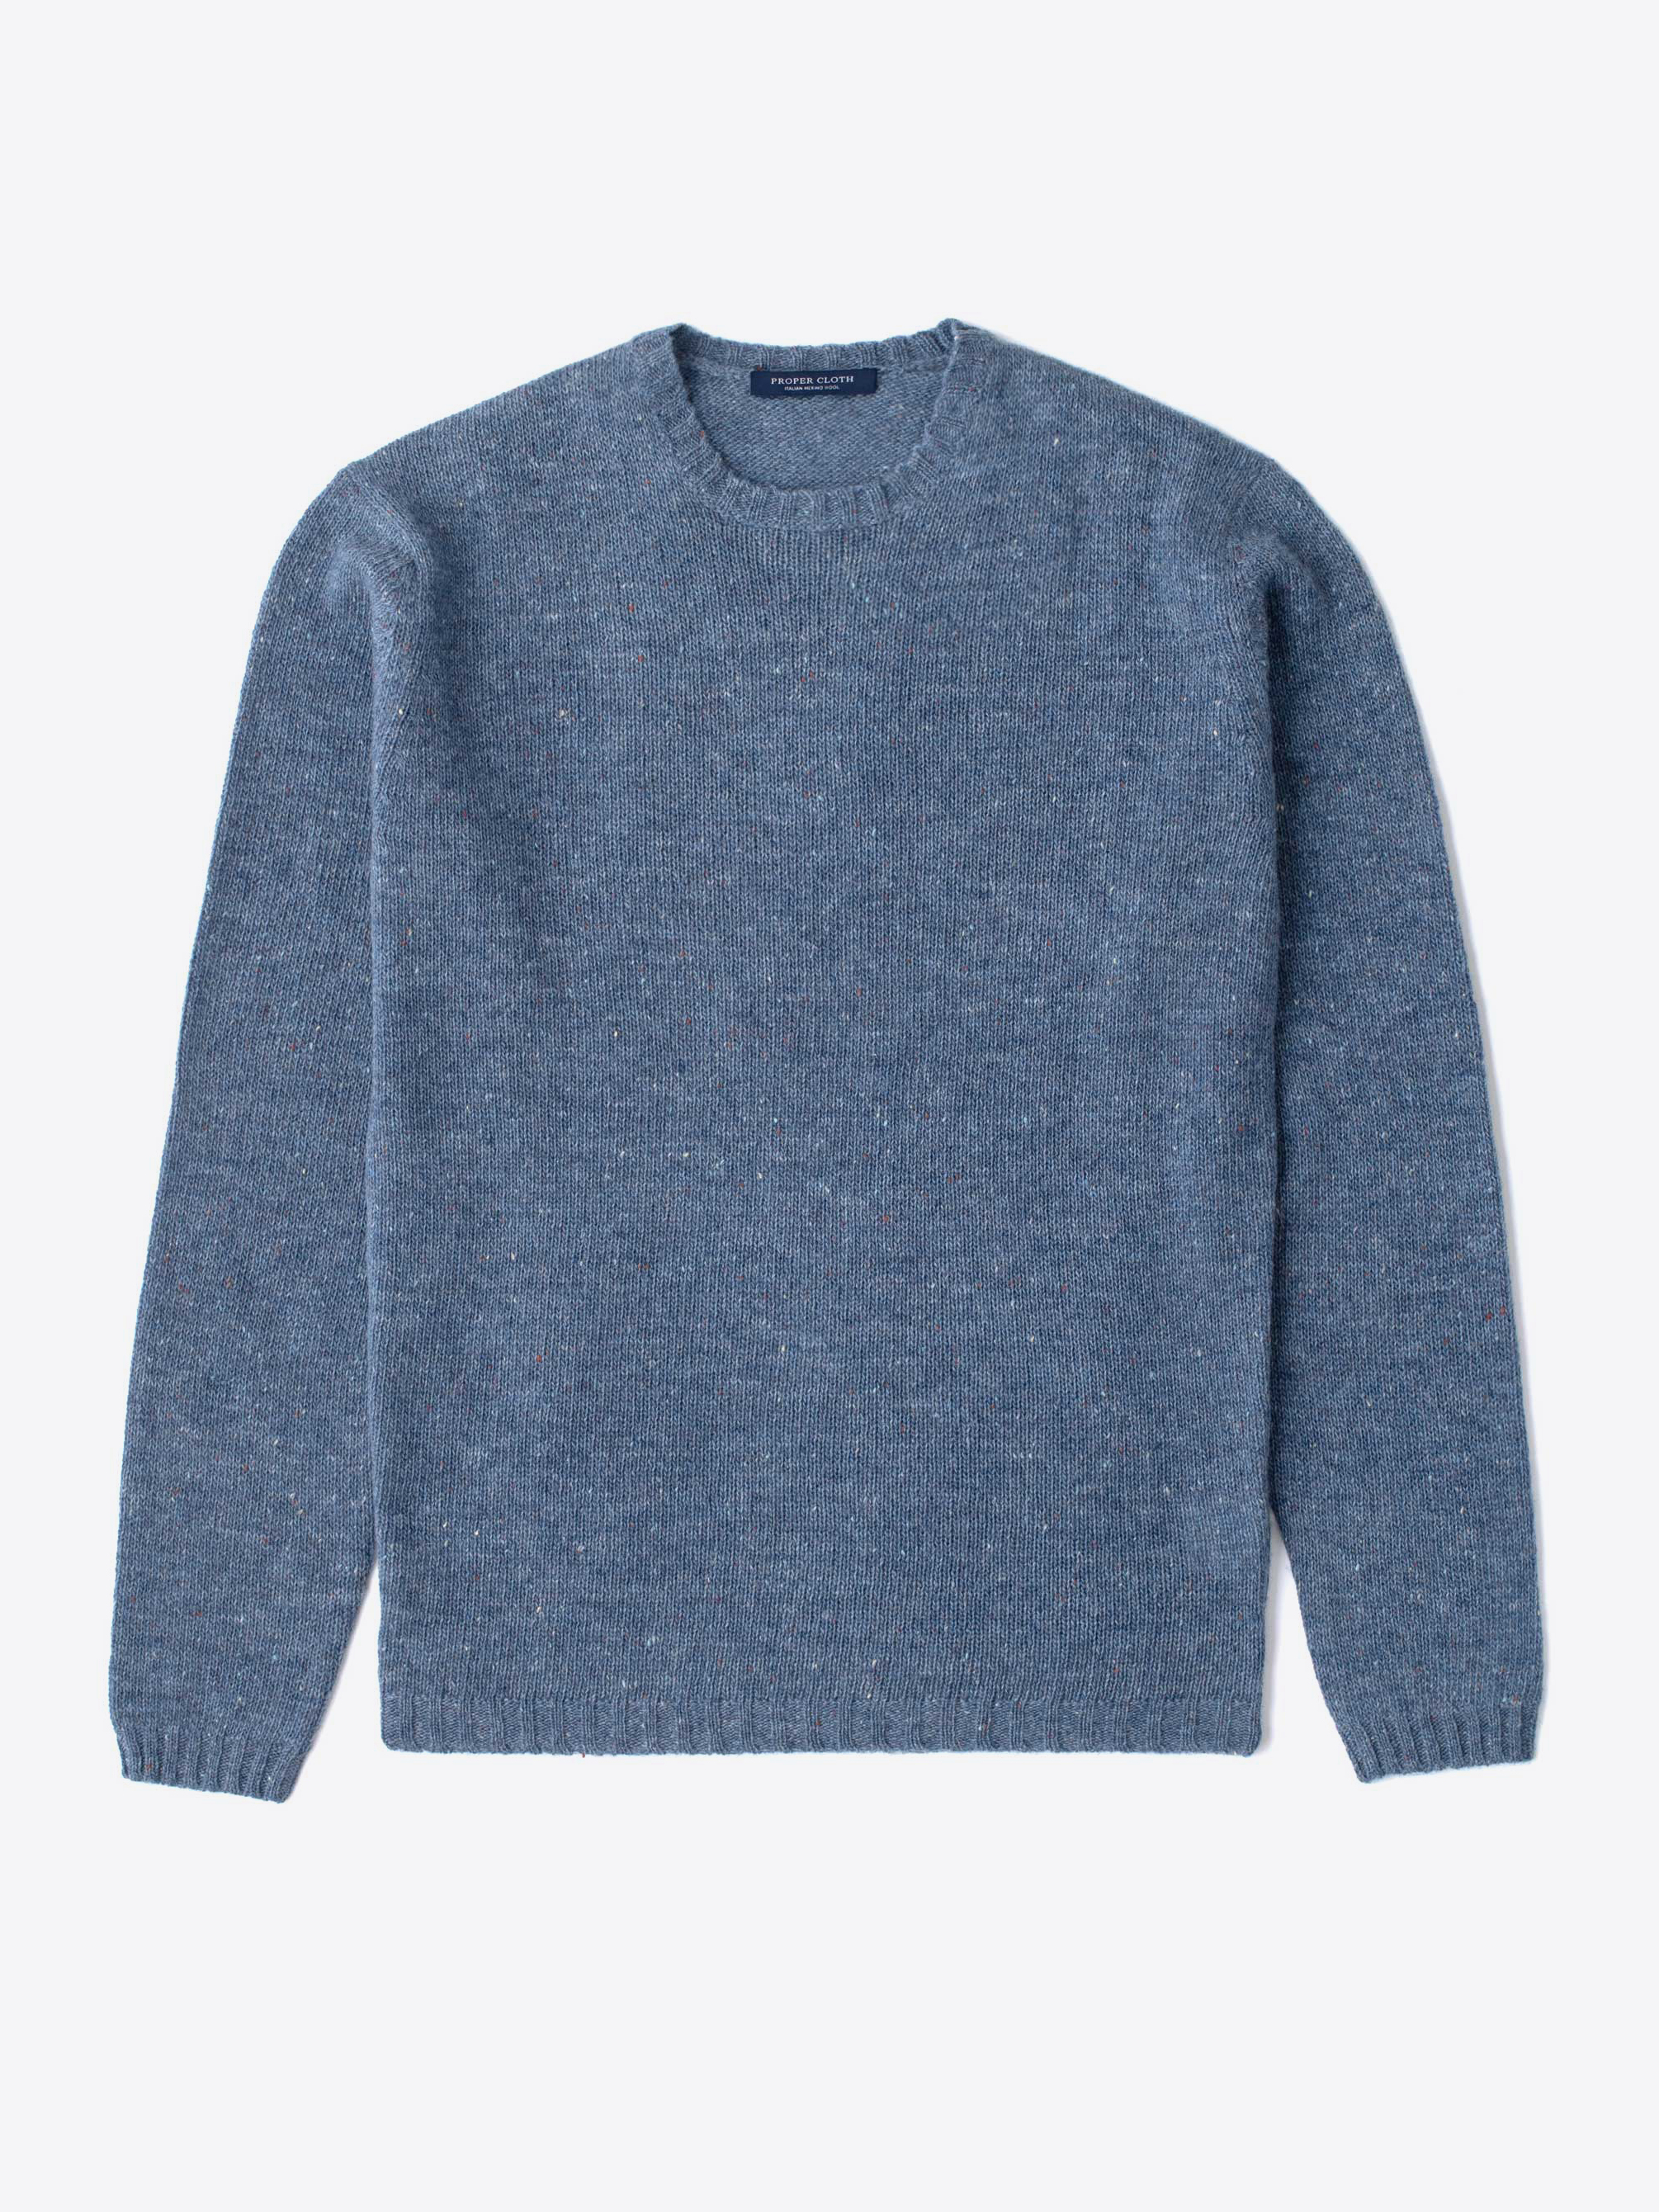 Zoom Image of Slate Donegal Lambswool Sweater